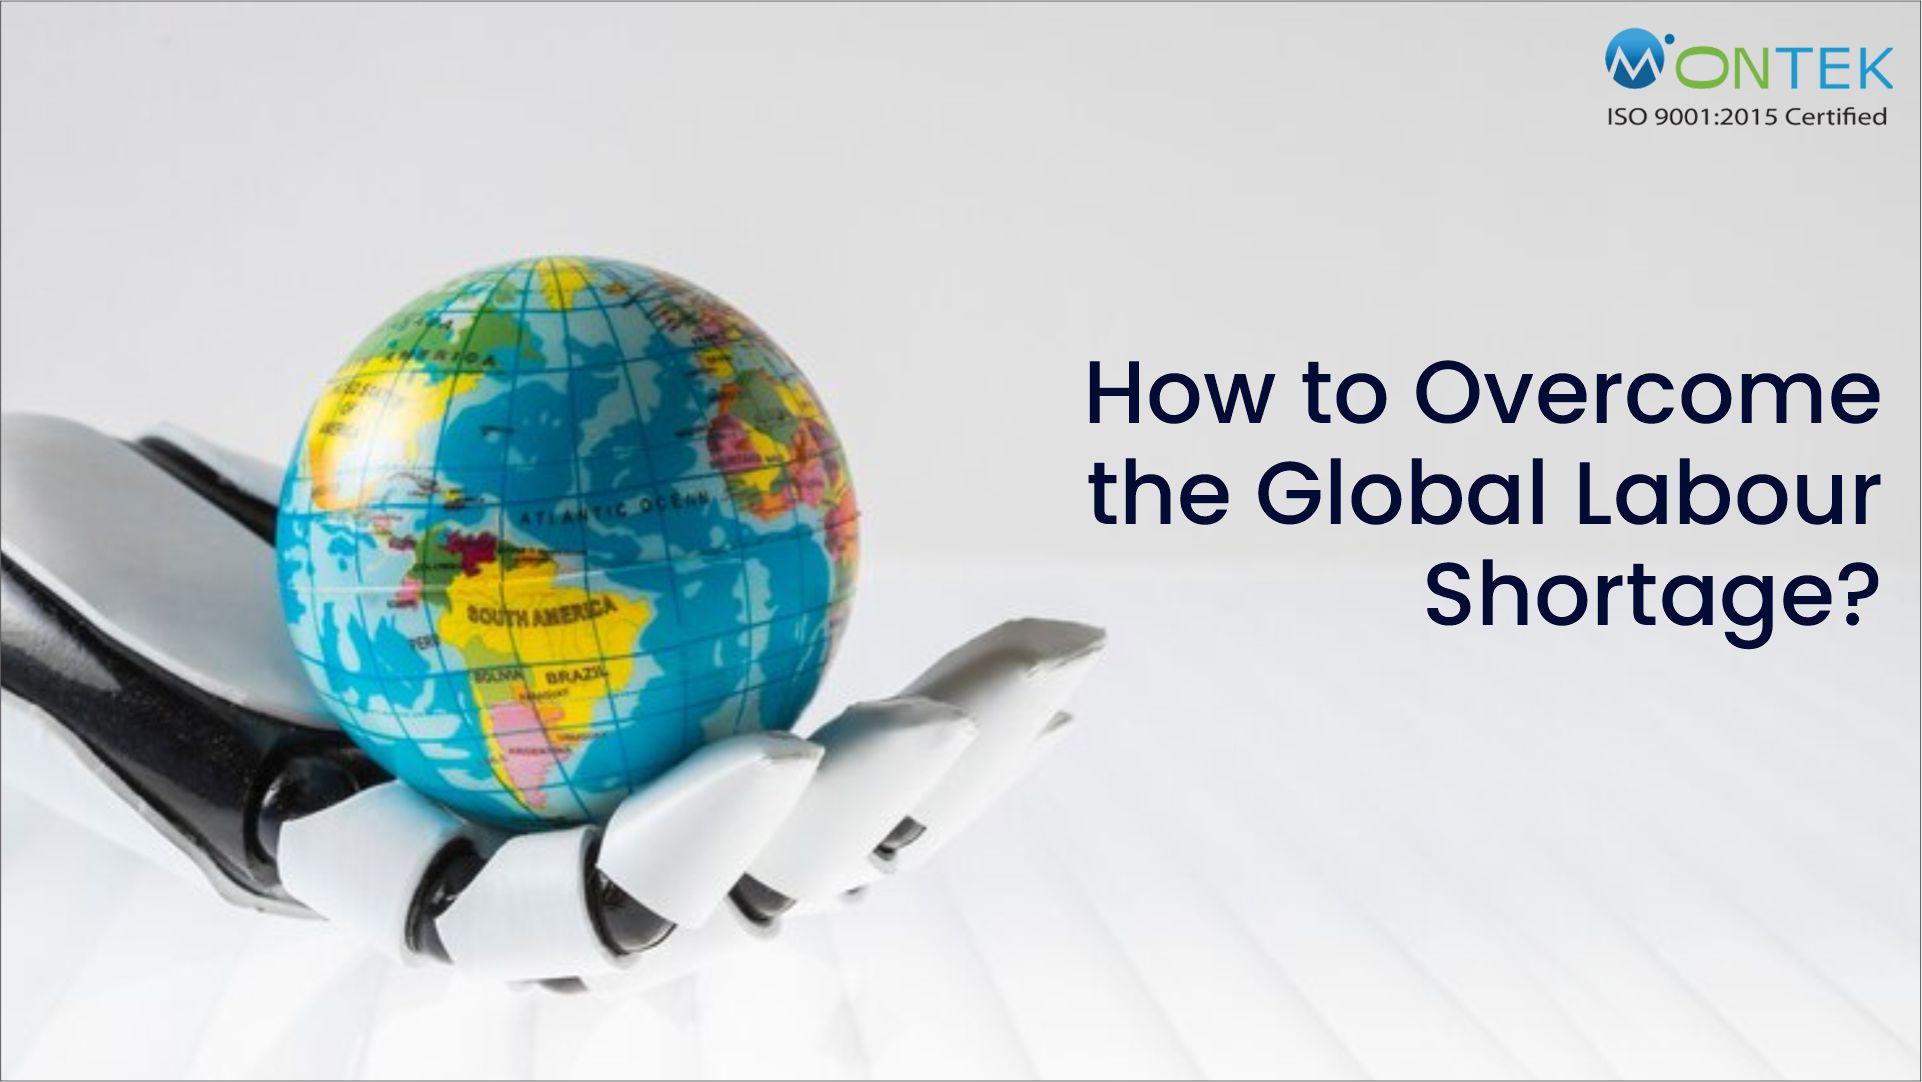 How to Overcome the Global Labour Shortage